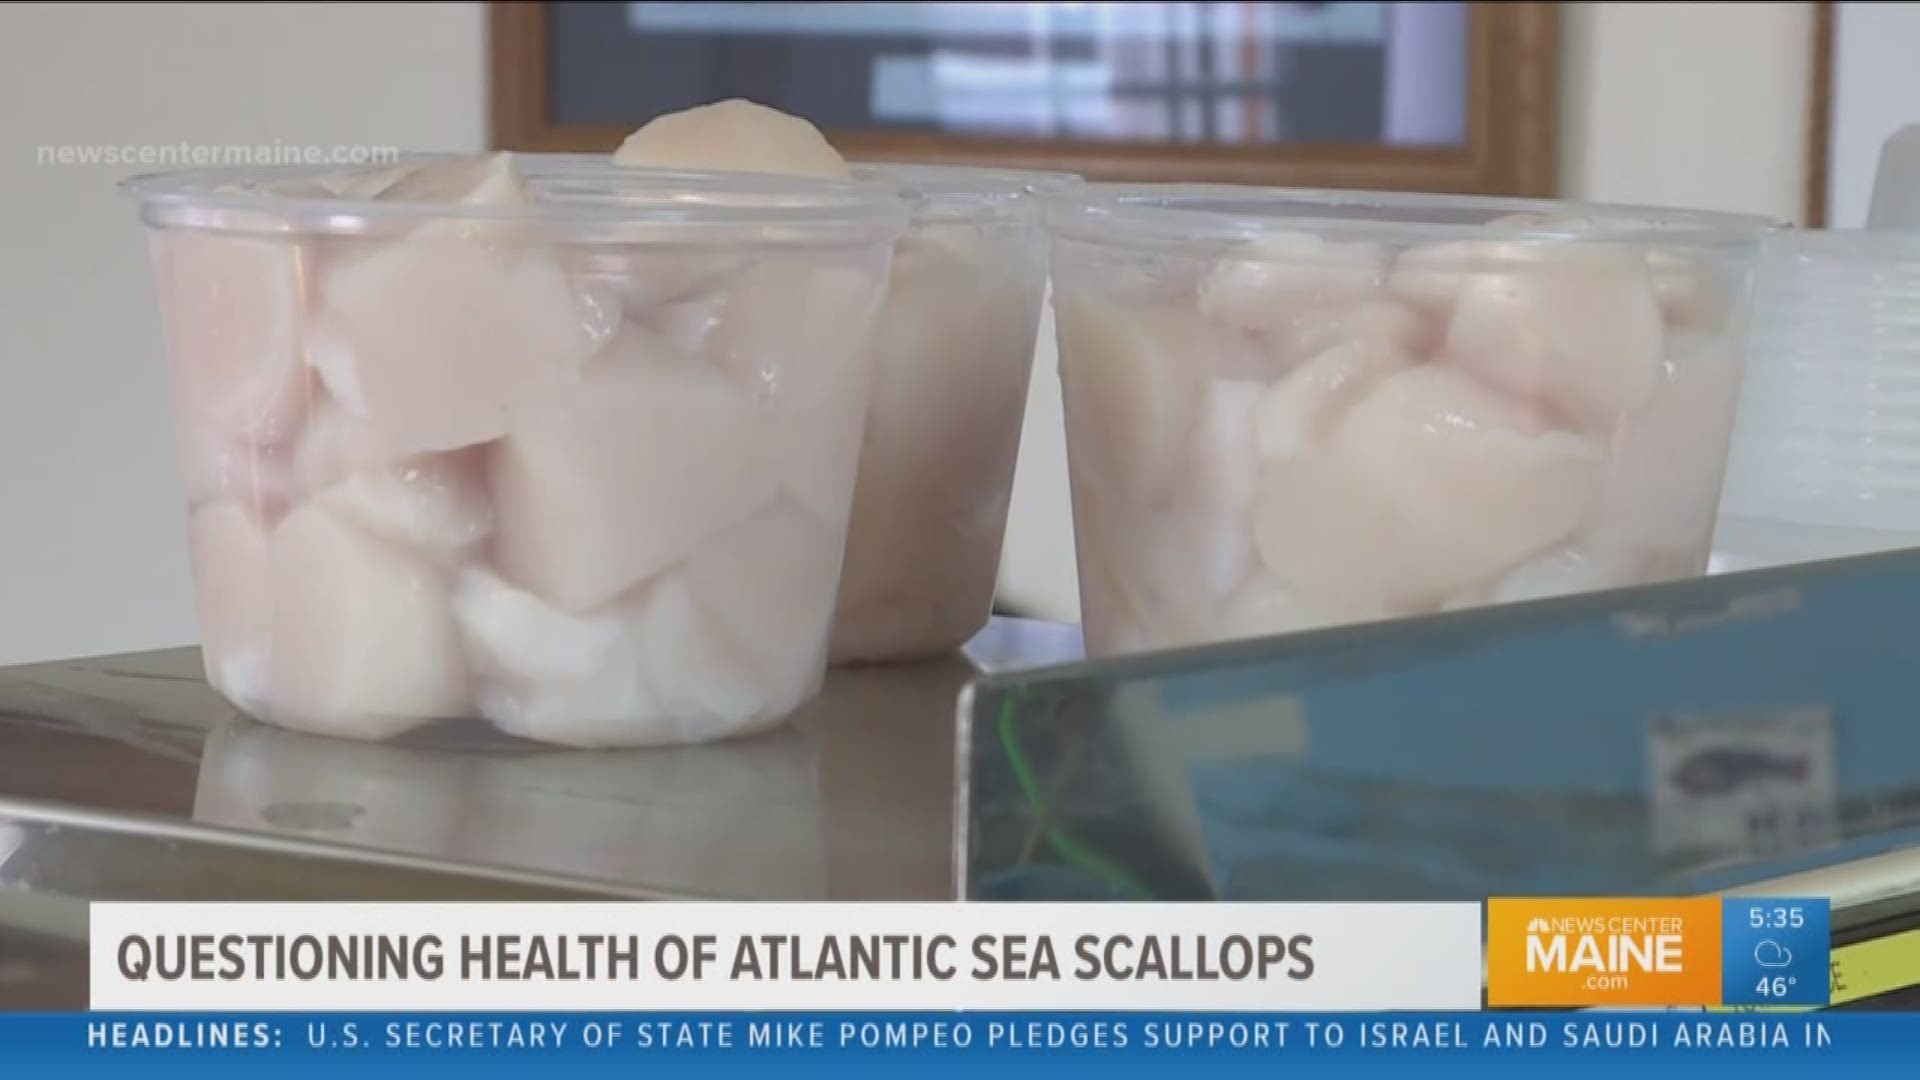 Federal regulators review health of scallop fishery